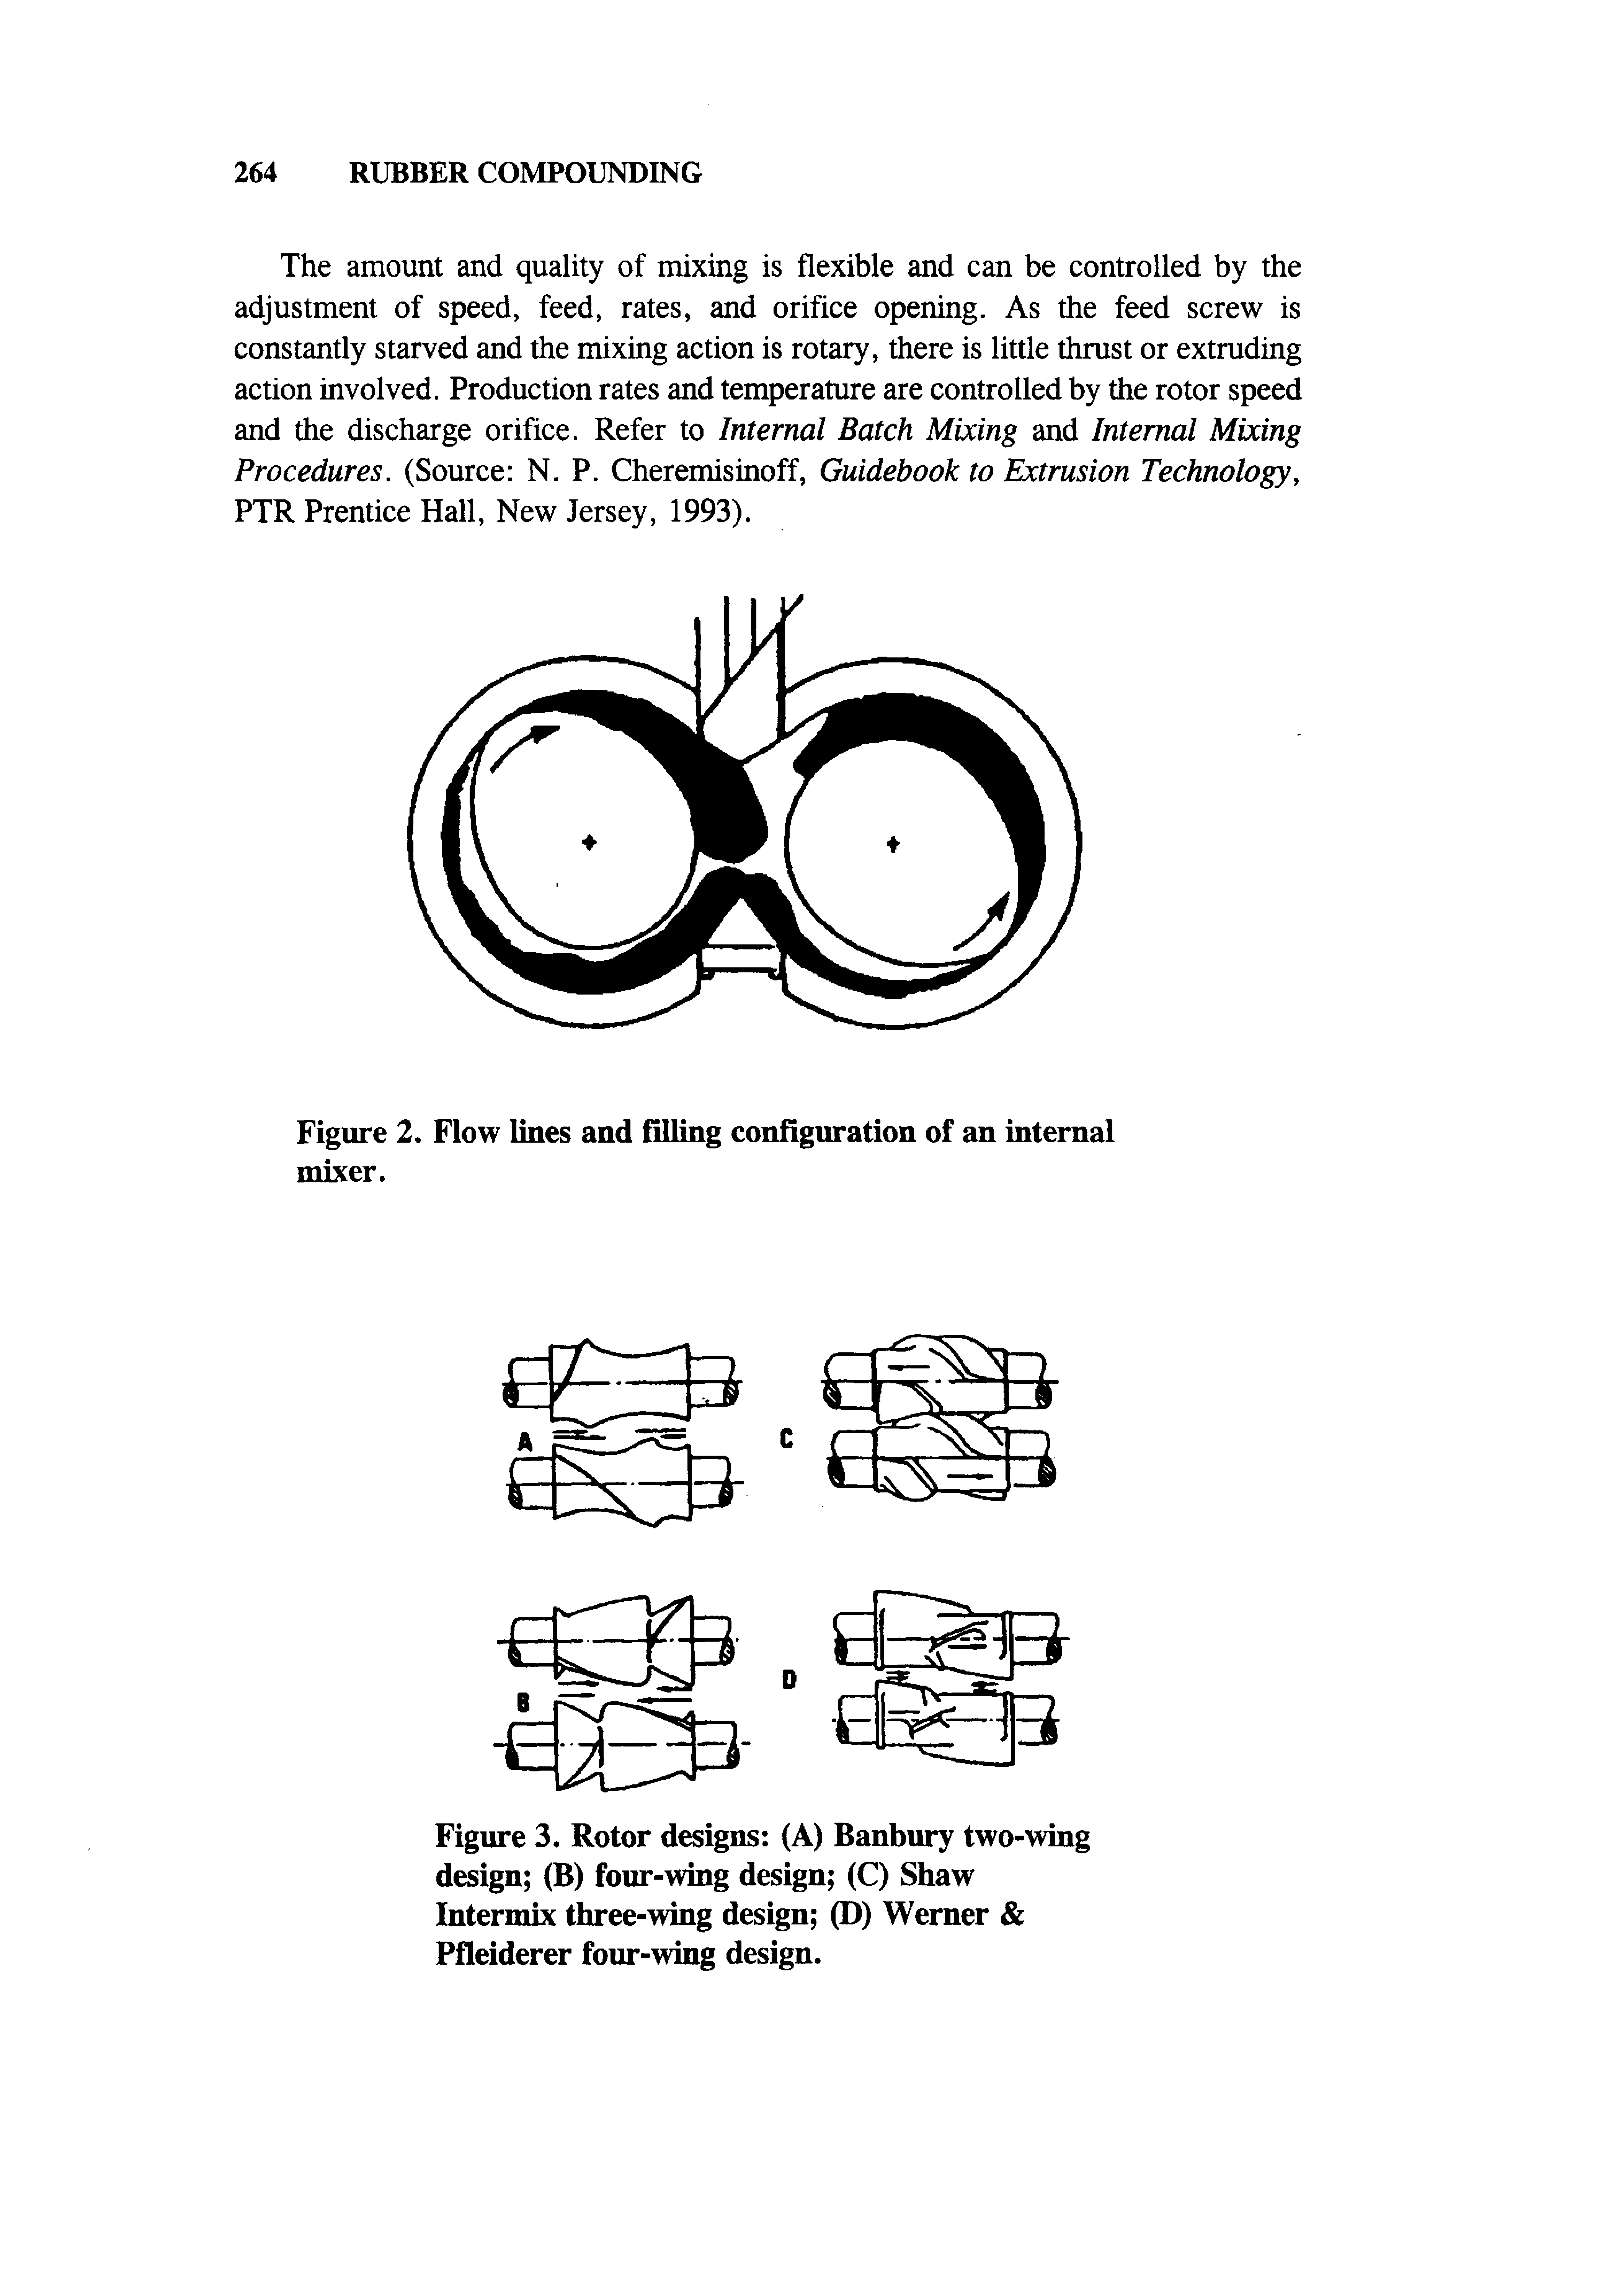 Figure 3, Rotor designs (A) Banbury two-wing design (B) four-wing design (C) Shaw Intermix three-wing design (D) Werner Pfleiderer four-wing design.